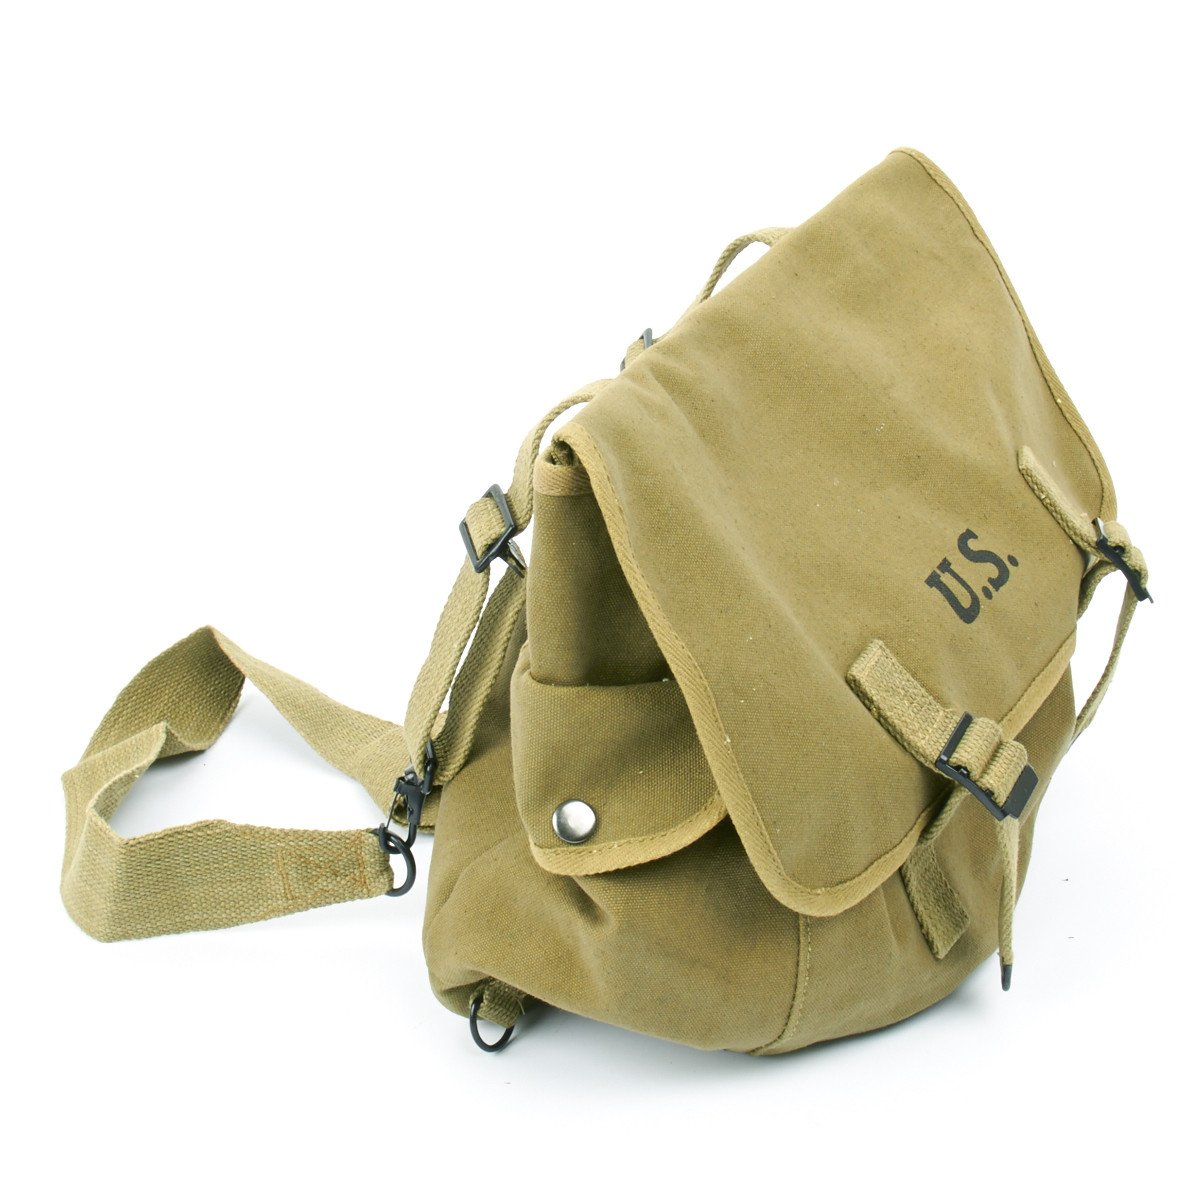 E490. WWII RUBBERIZED MUSETTE BAG WITH BRITISH MADE STRAP